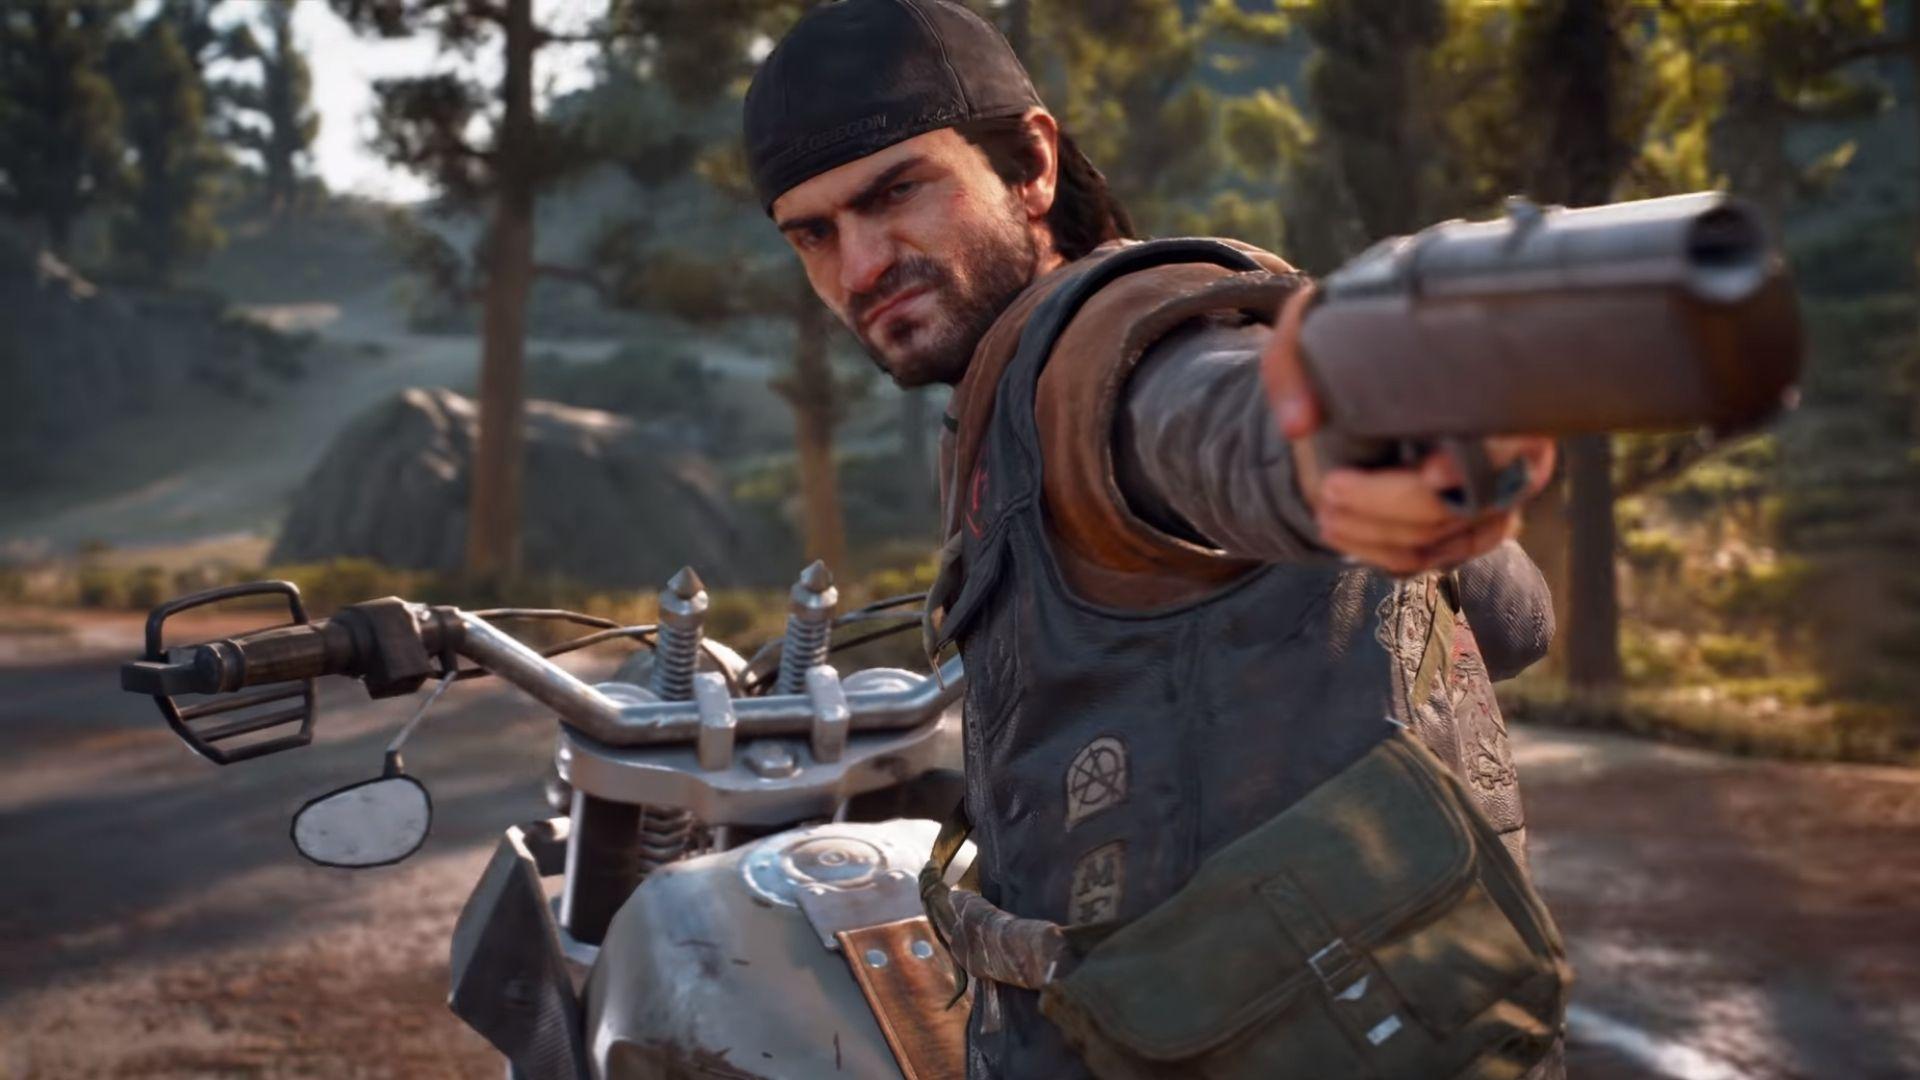 How the game goes. Дикон сент Джон. Days gone Дикон Сейнт-Джон. Days gone. Days gone Дикон.